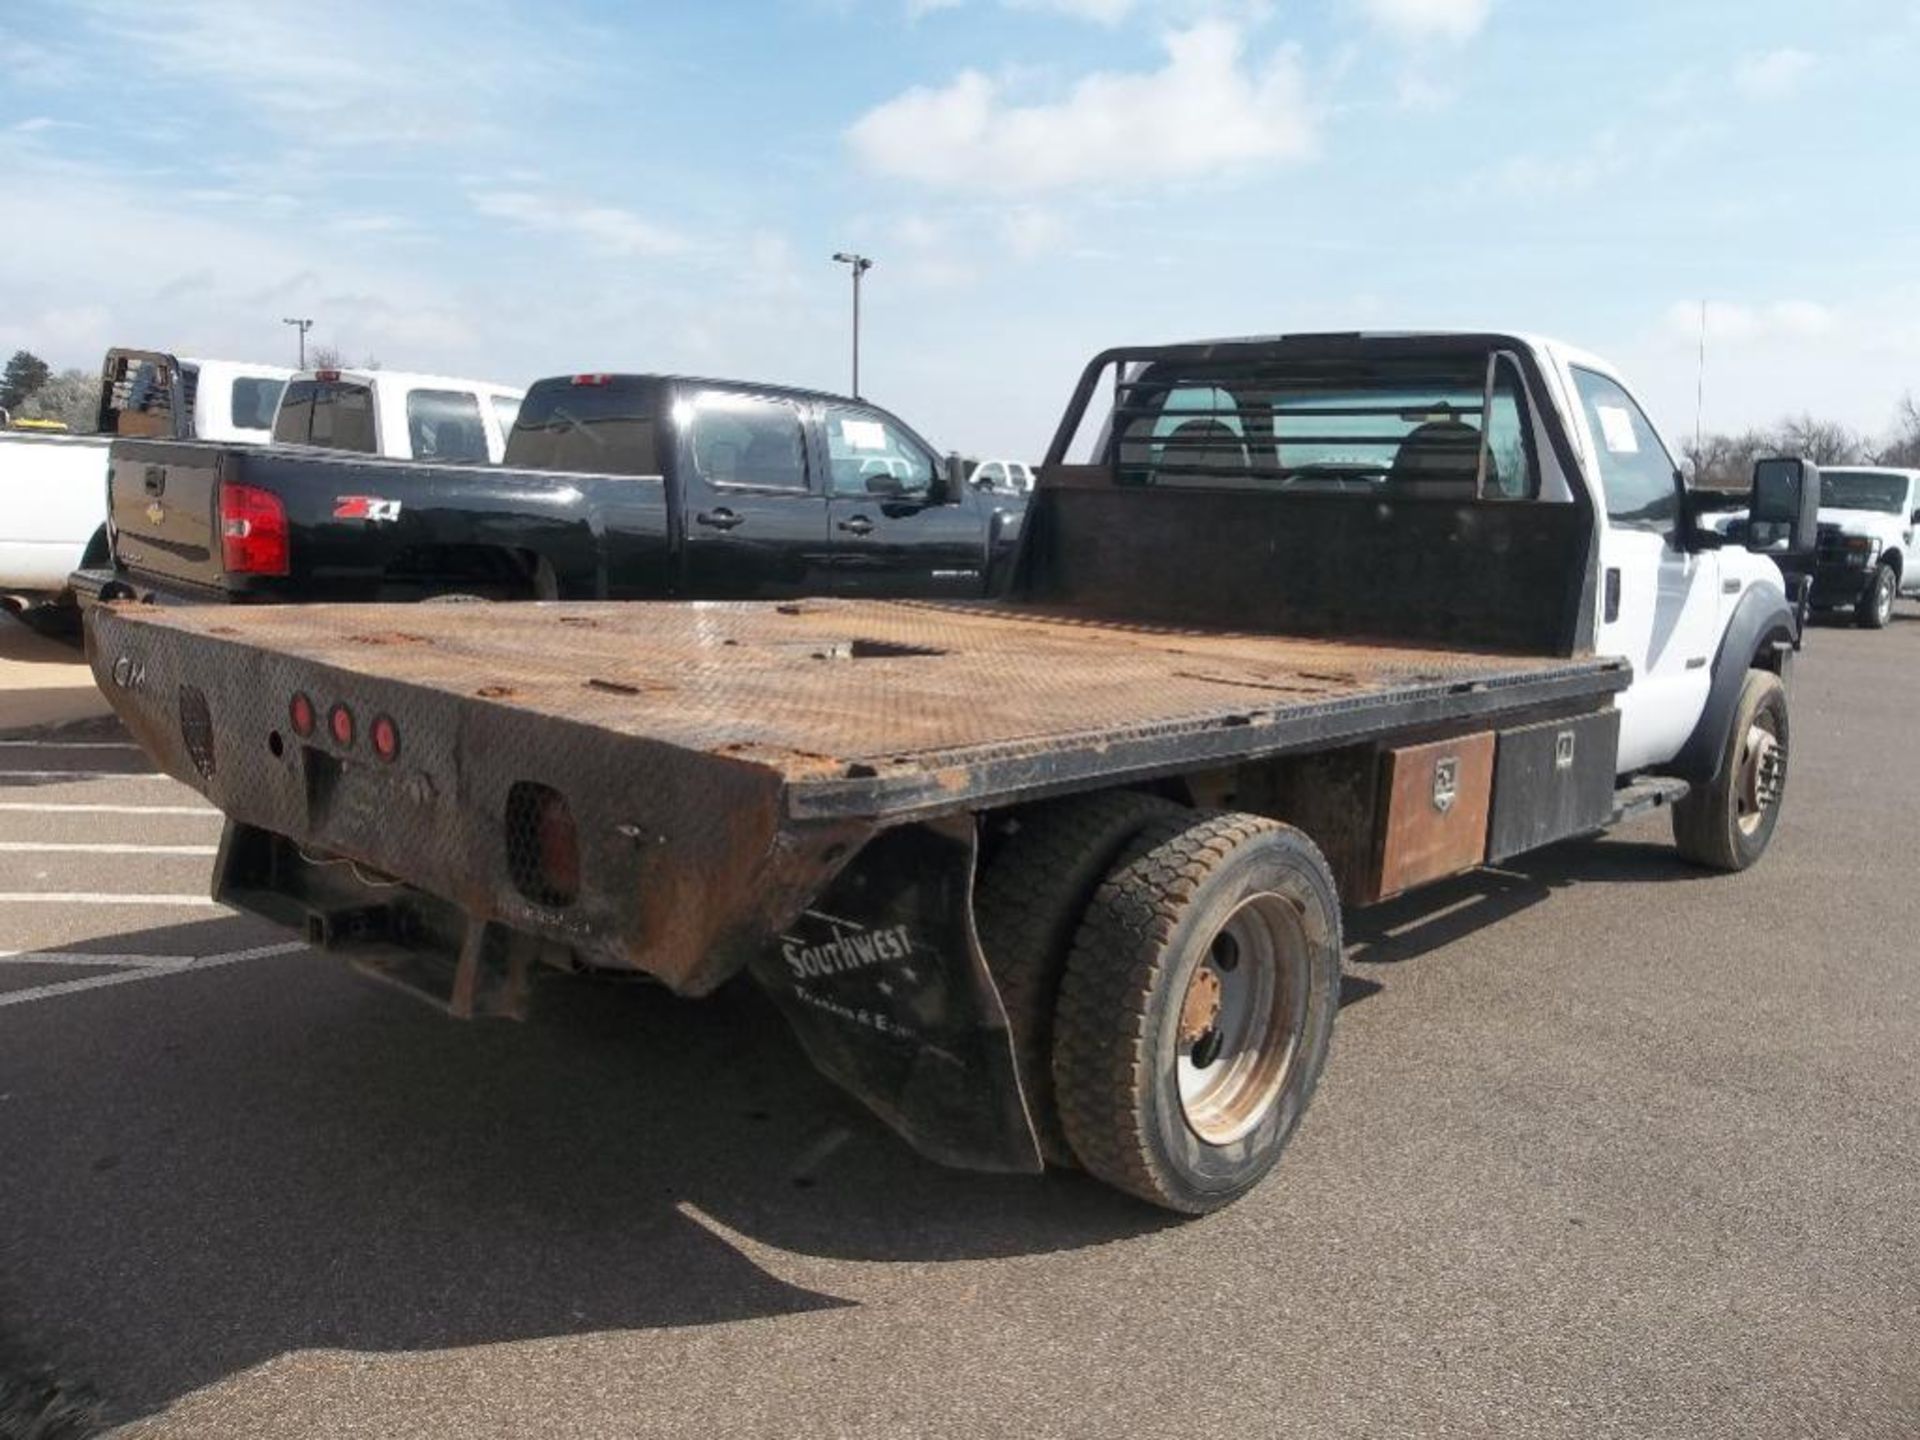 2007 Ford F450 Flatbed Truck s/n 1fdx46p97ea94803, v8 diesel eng, auto trans, od reads 158482 miles - Image 8 of 11